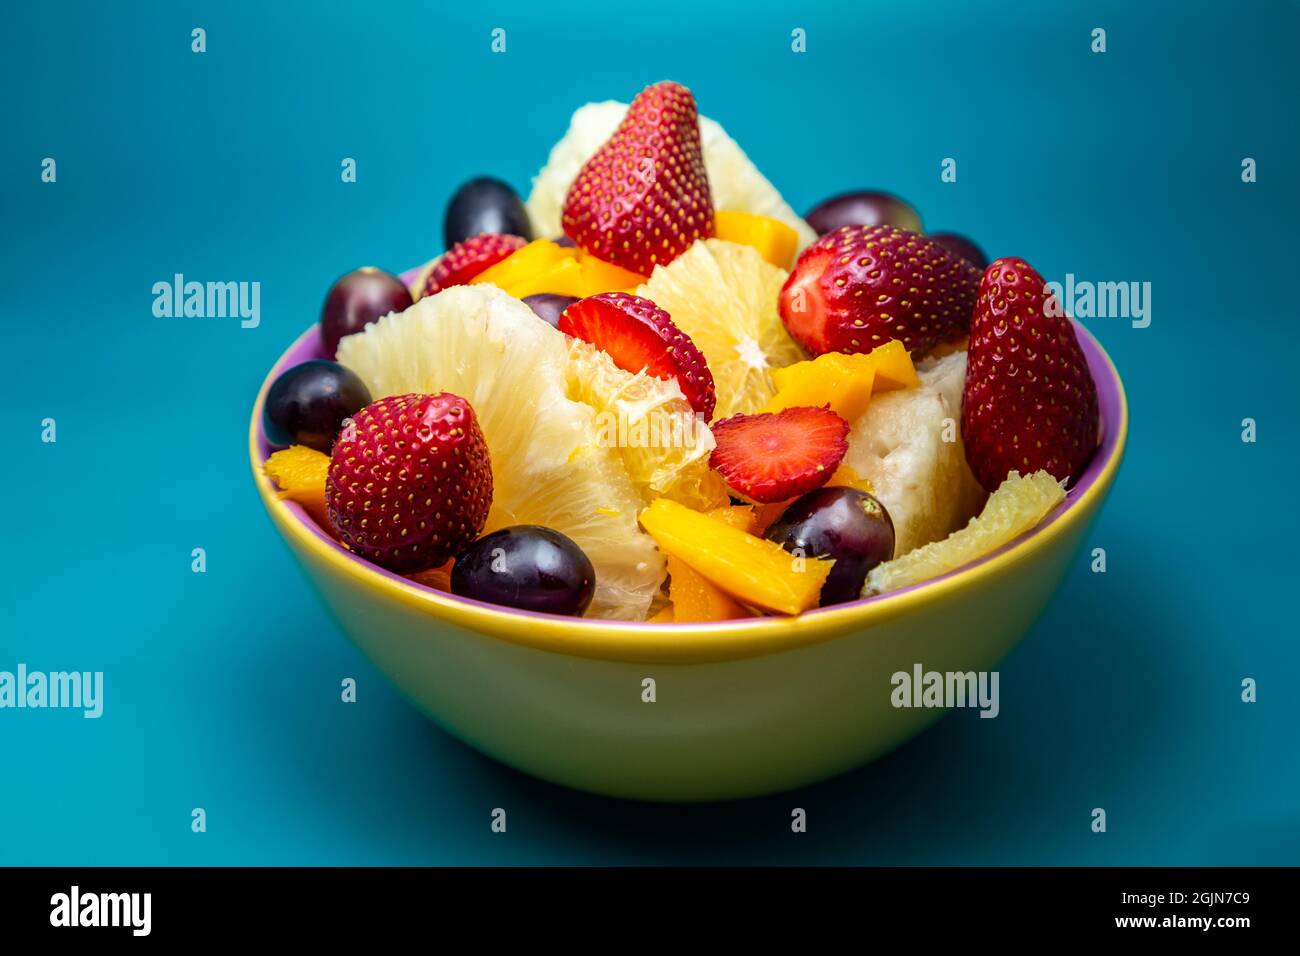 A serving of fruit salad in a yellow bowl with a tiffany blue background. Stock Photo